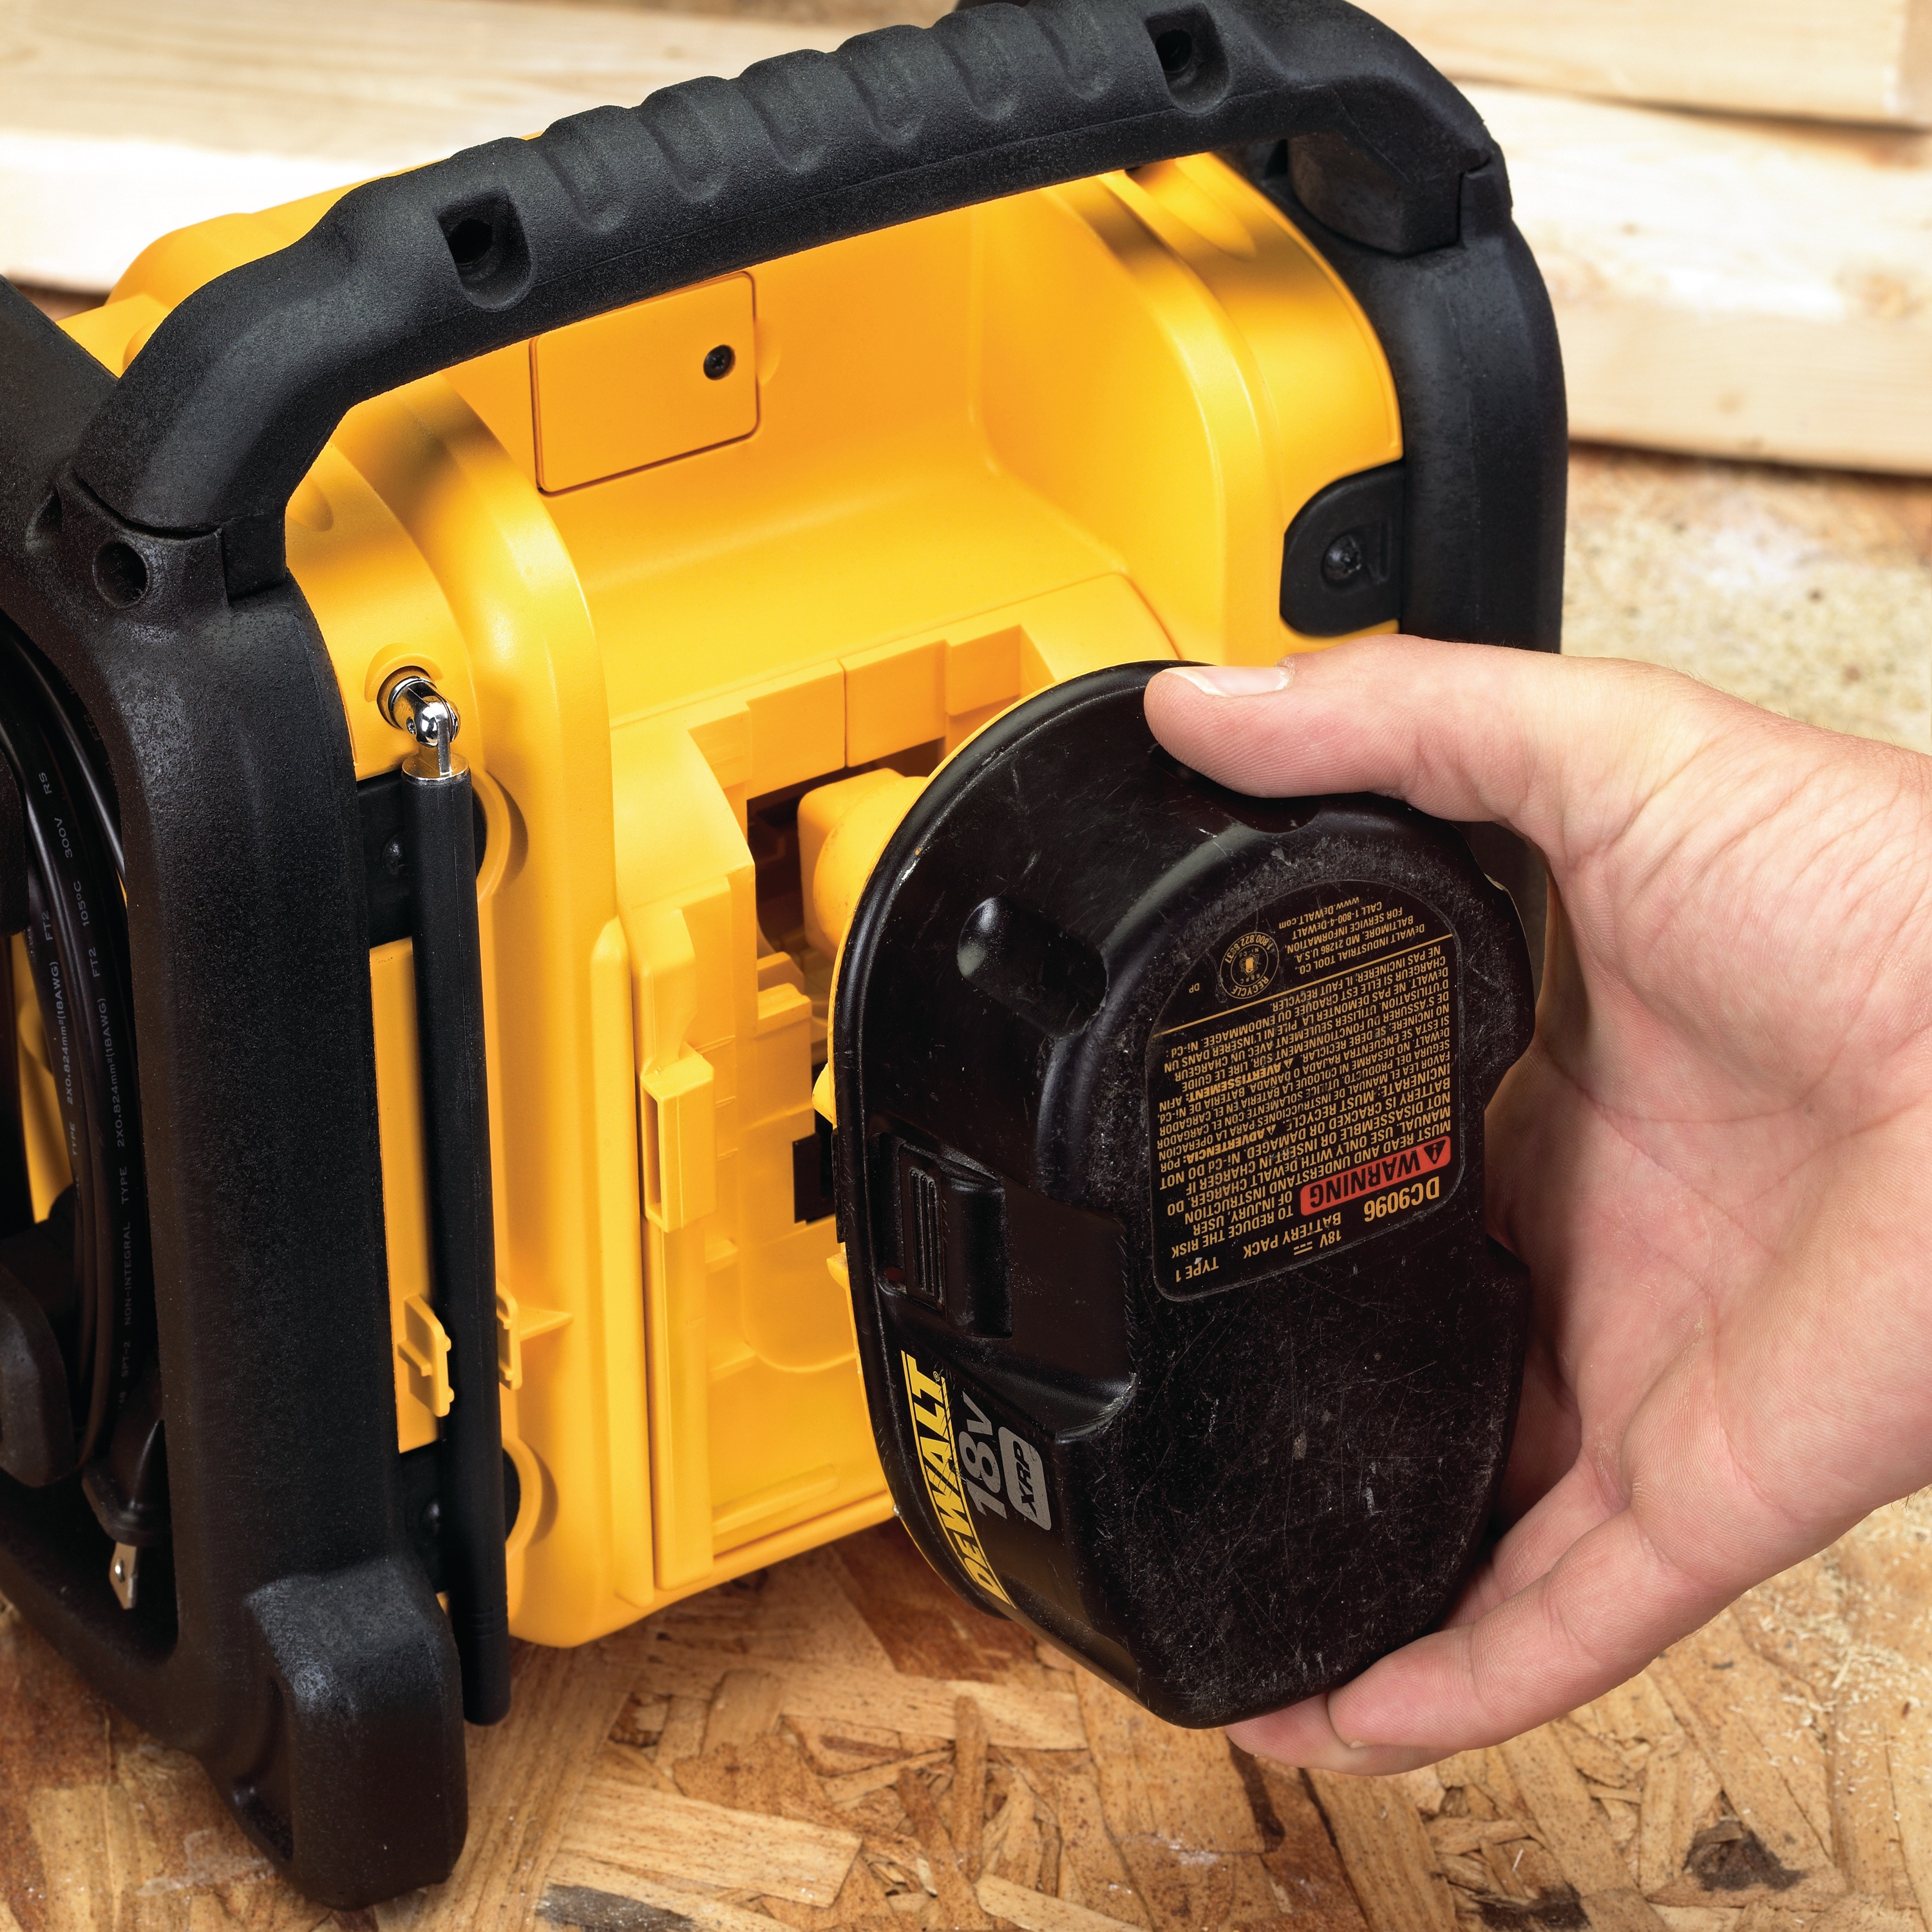 Separate charger feature of Compact Worksite Radio.